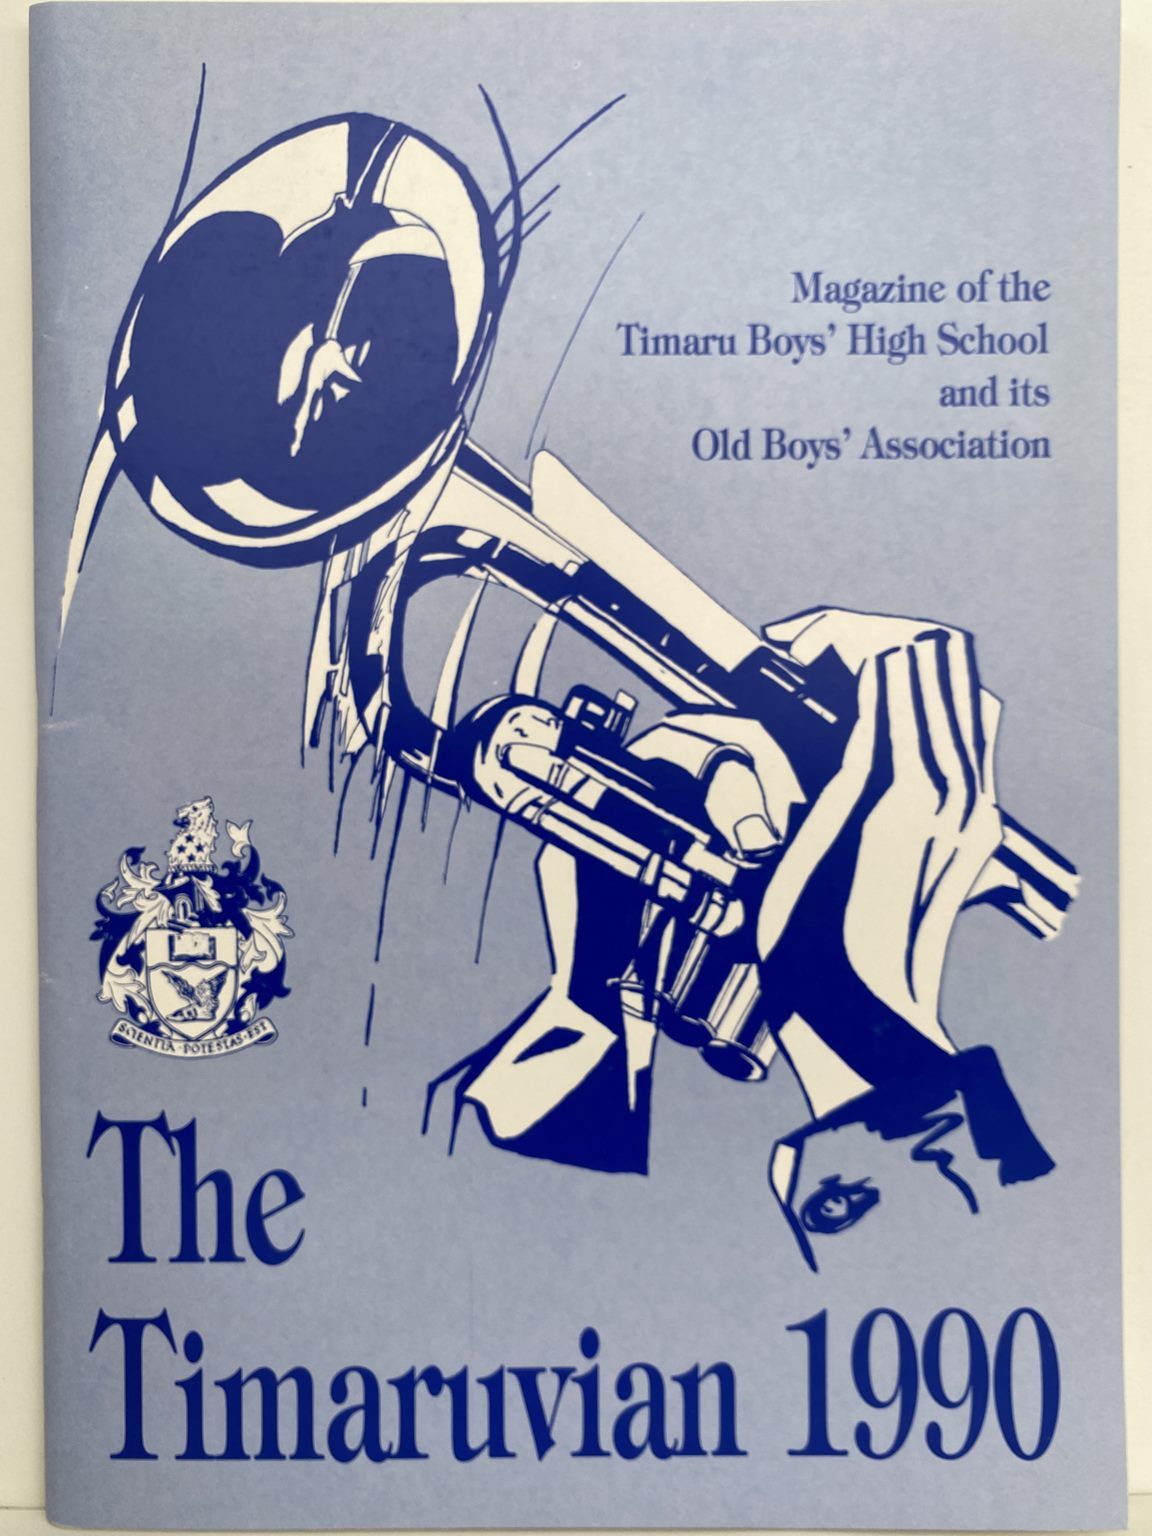 THE TIMARUVIAN: Magazine of the Timaru Boys' High School and its Old Boys' Association 1990